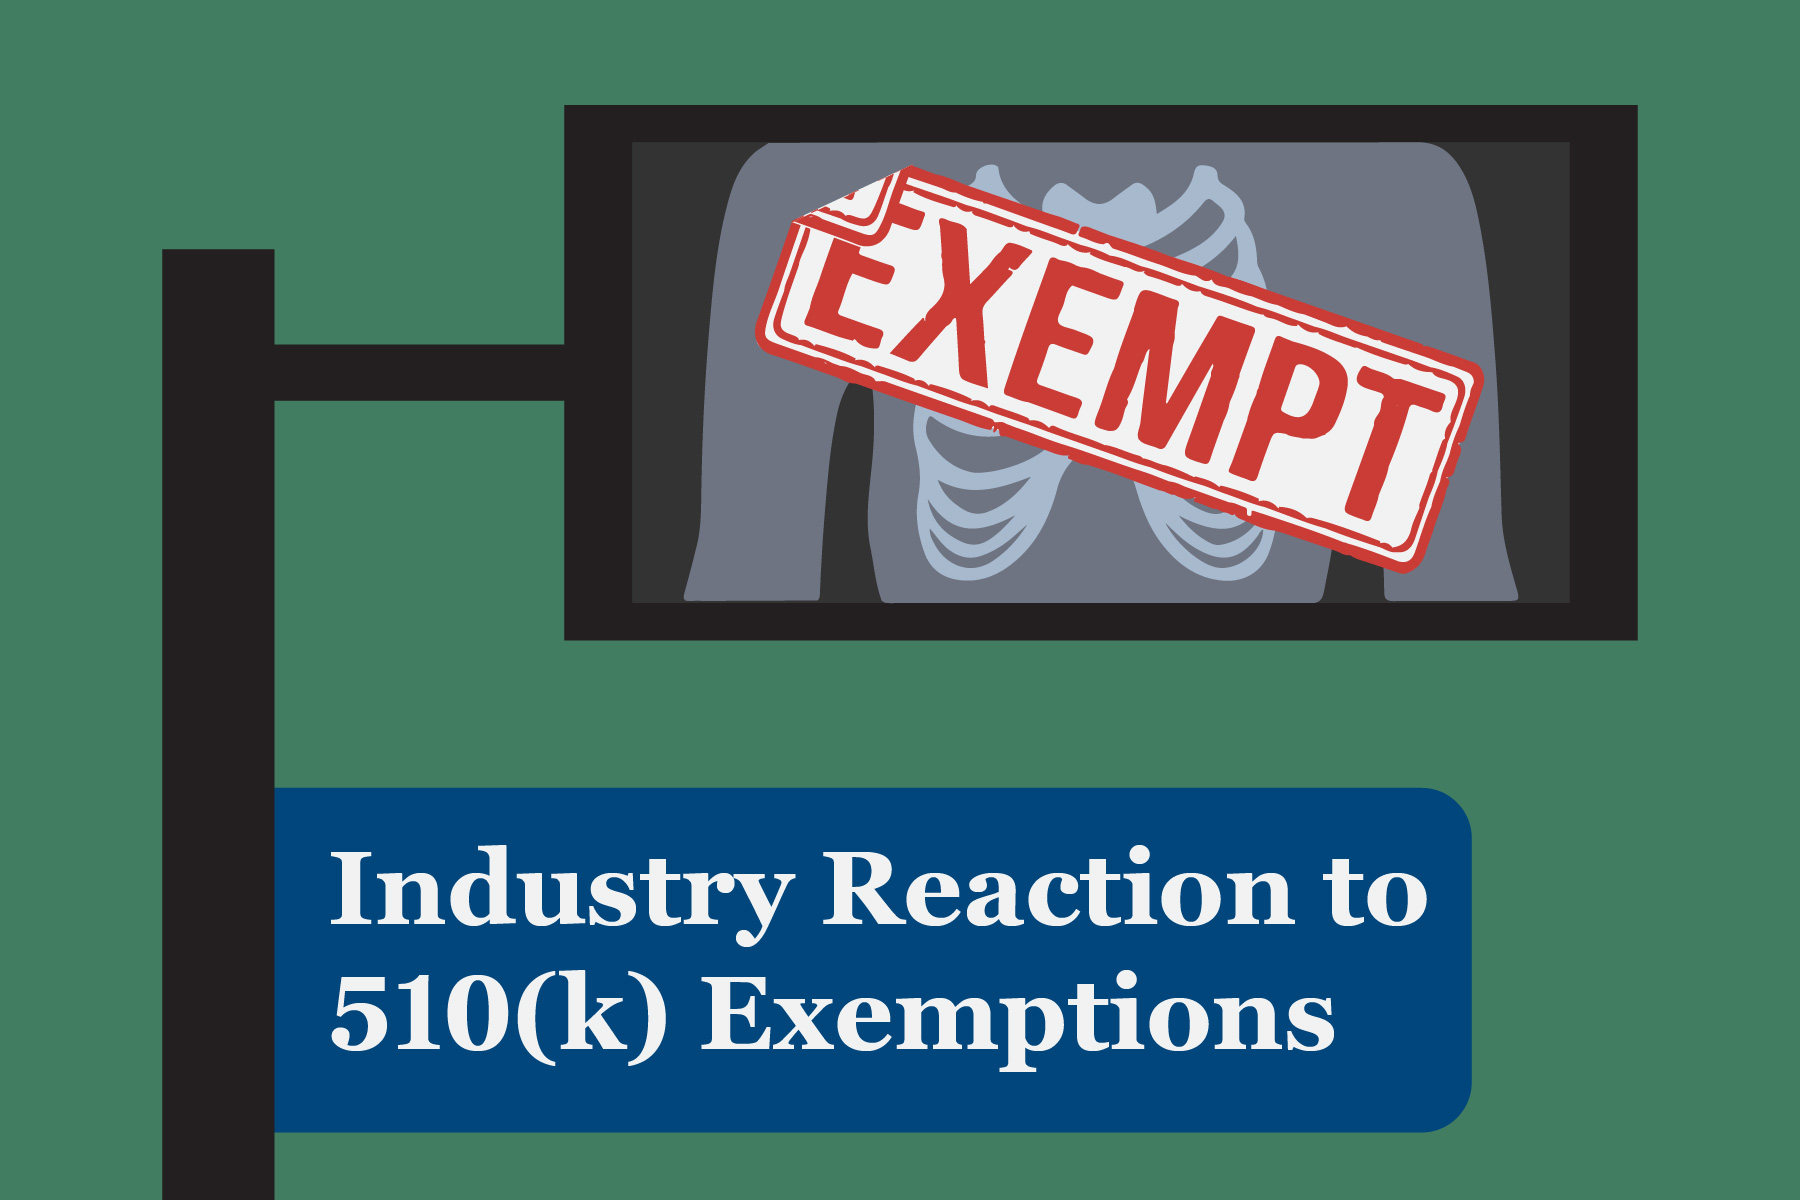 Industry Reaction to 510(k) Exemptions